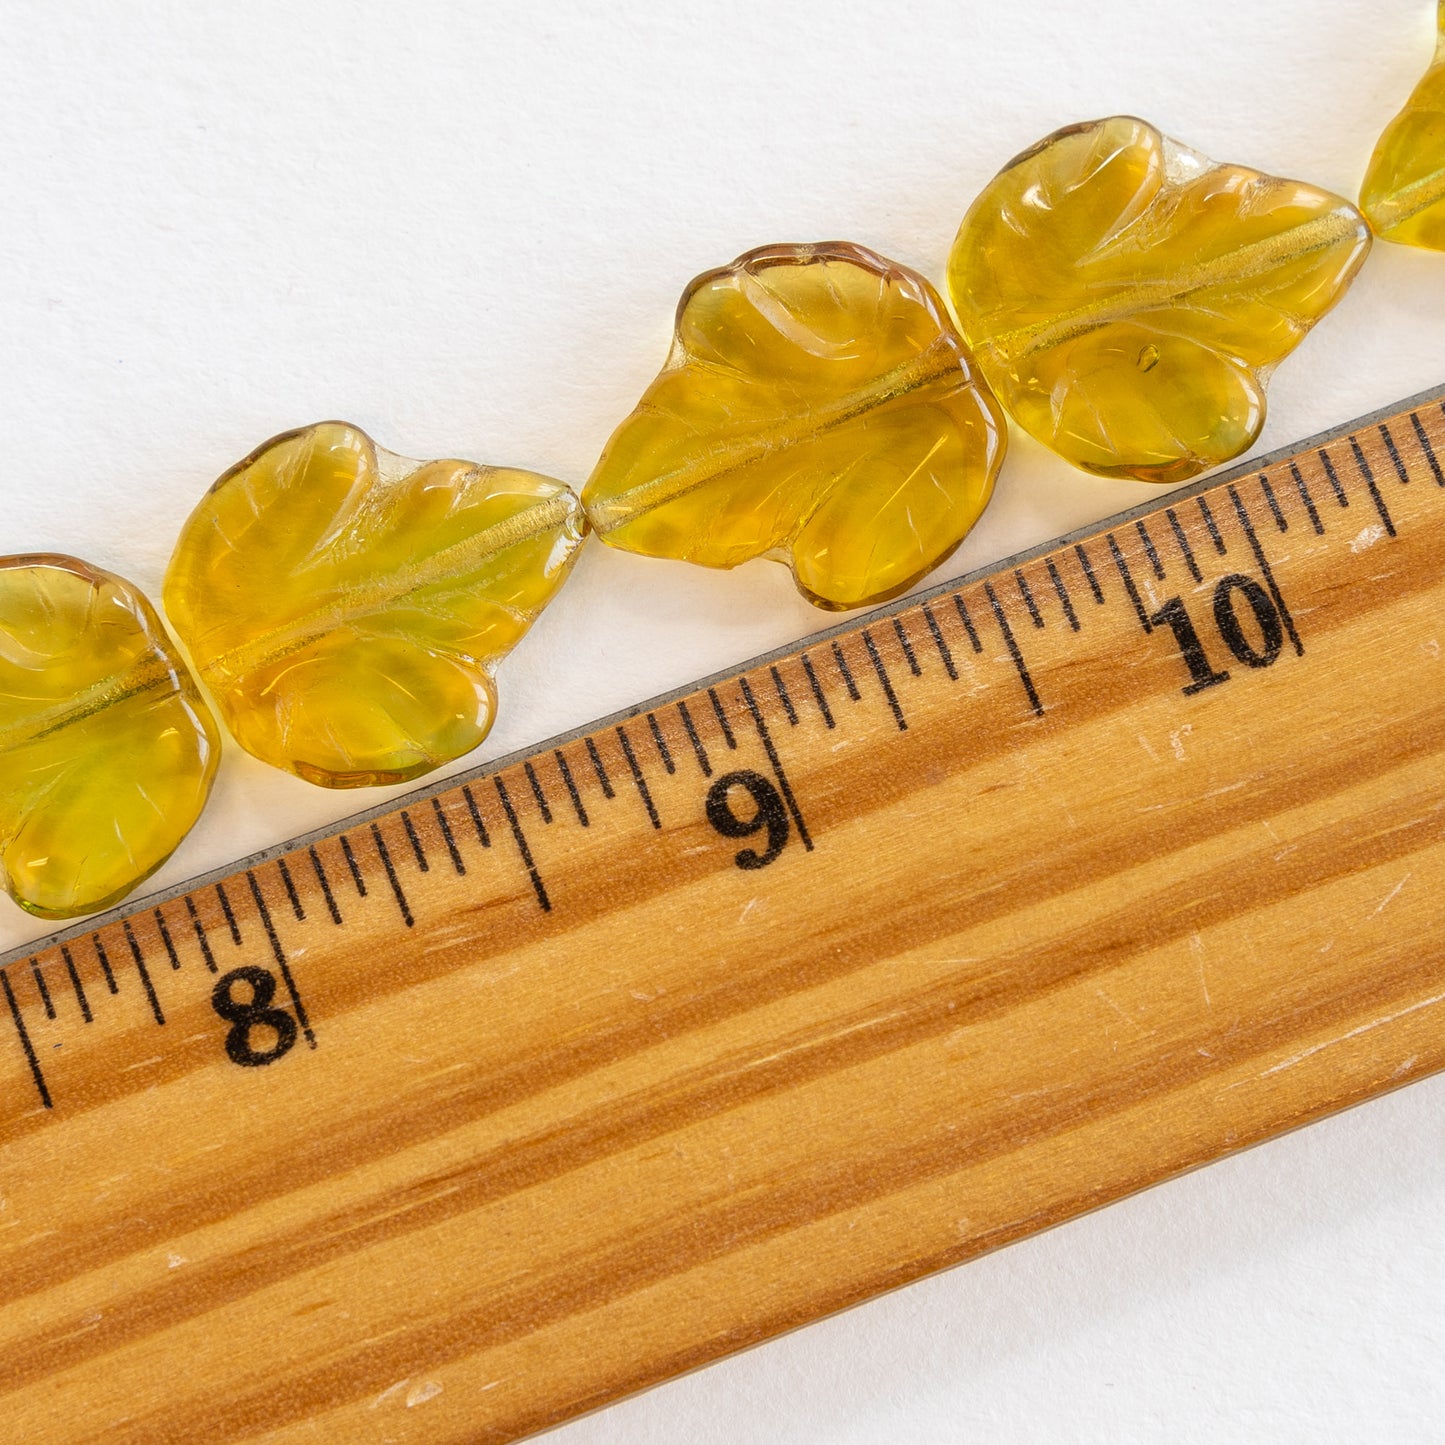 Load image into Gallery viewer, Large 17mm Glass Leaf Beads - Amber
